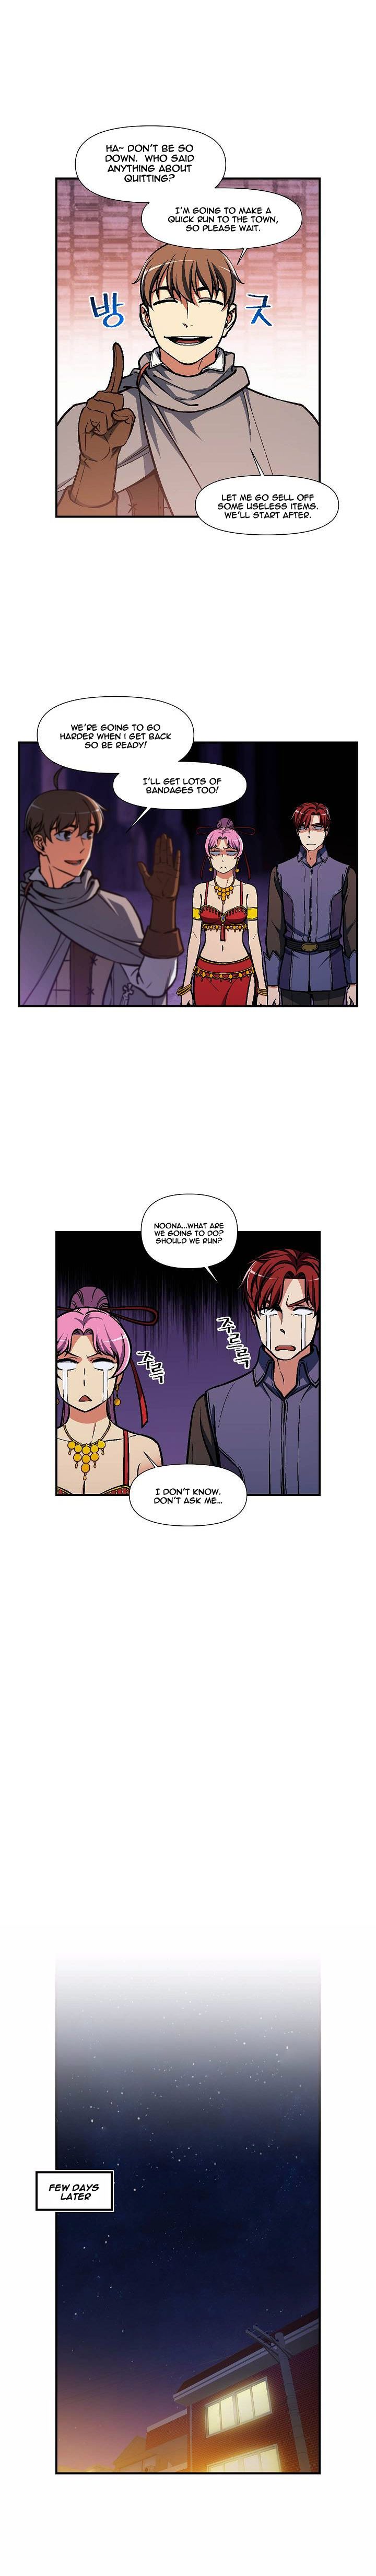 The Legendary Moonlight Sculptor Chapter 108 page 9